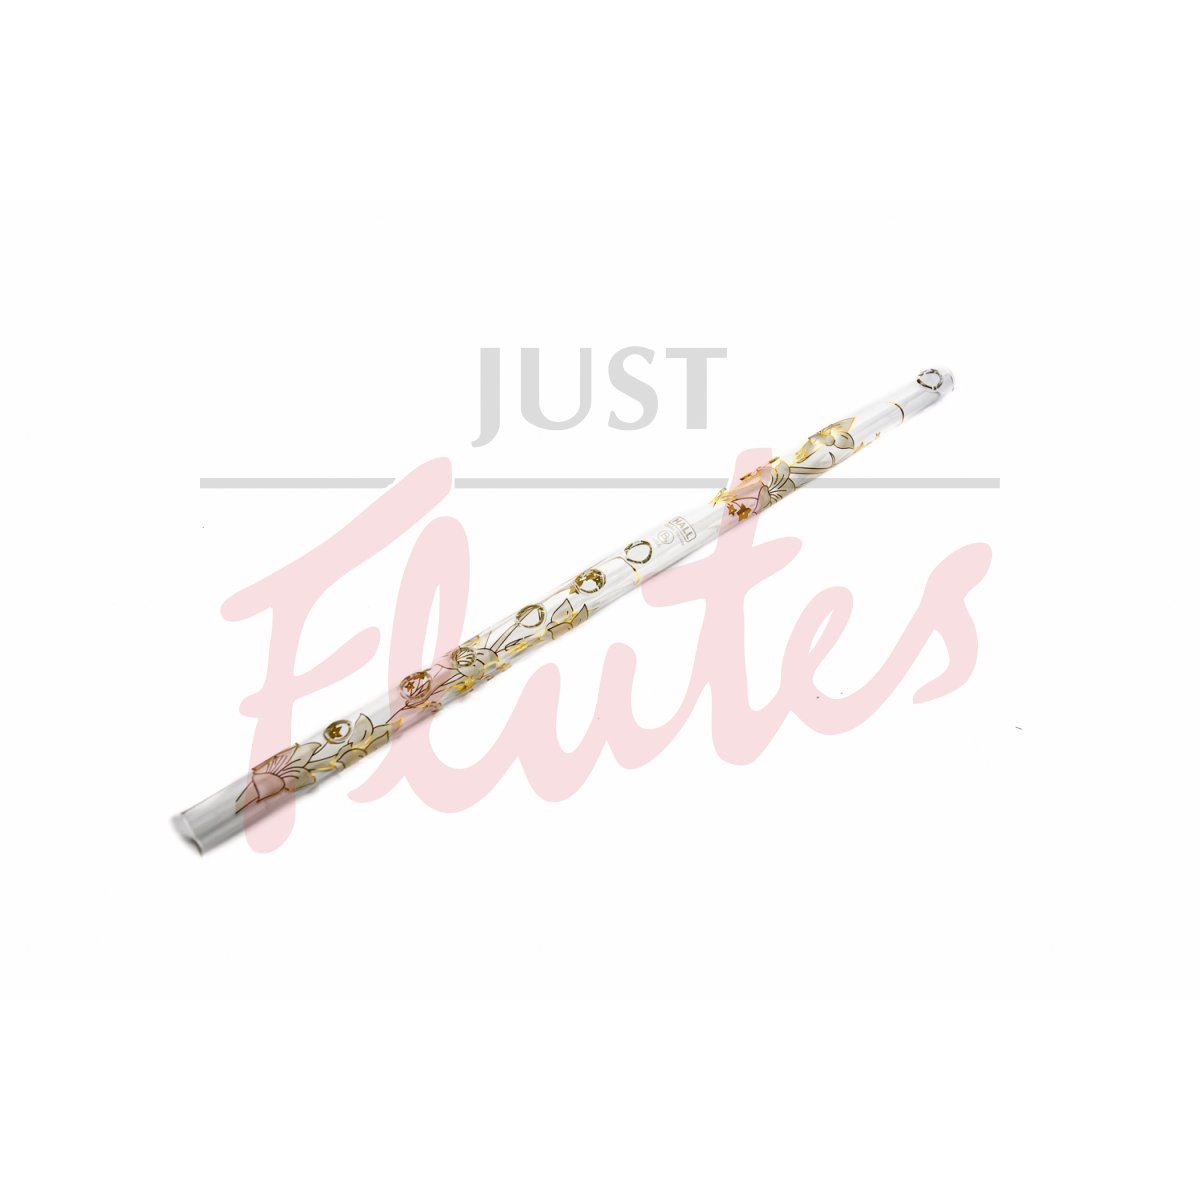 Hall 11401 Crystal Flute in Bb, White Lily